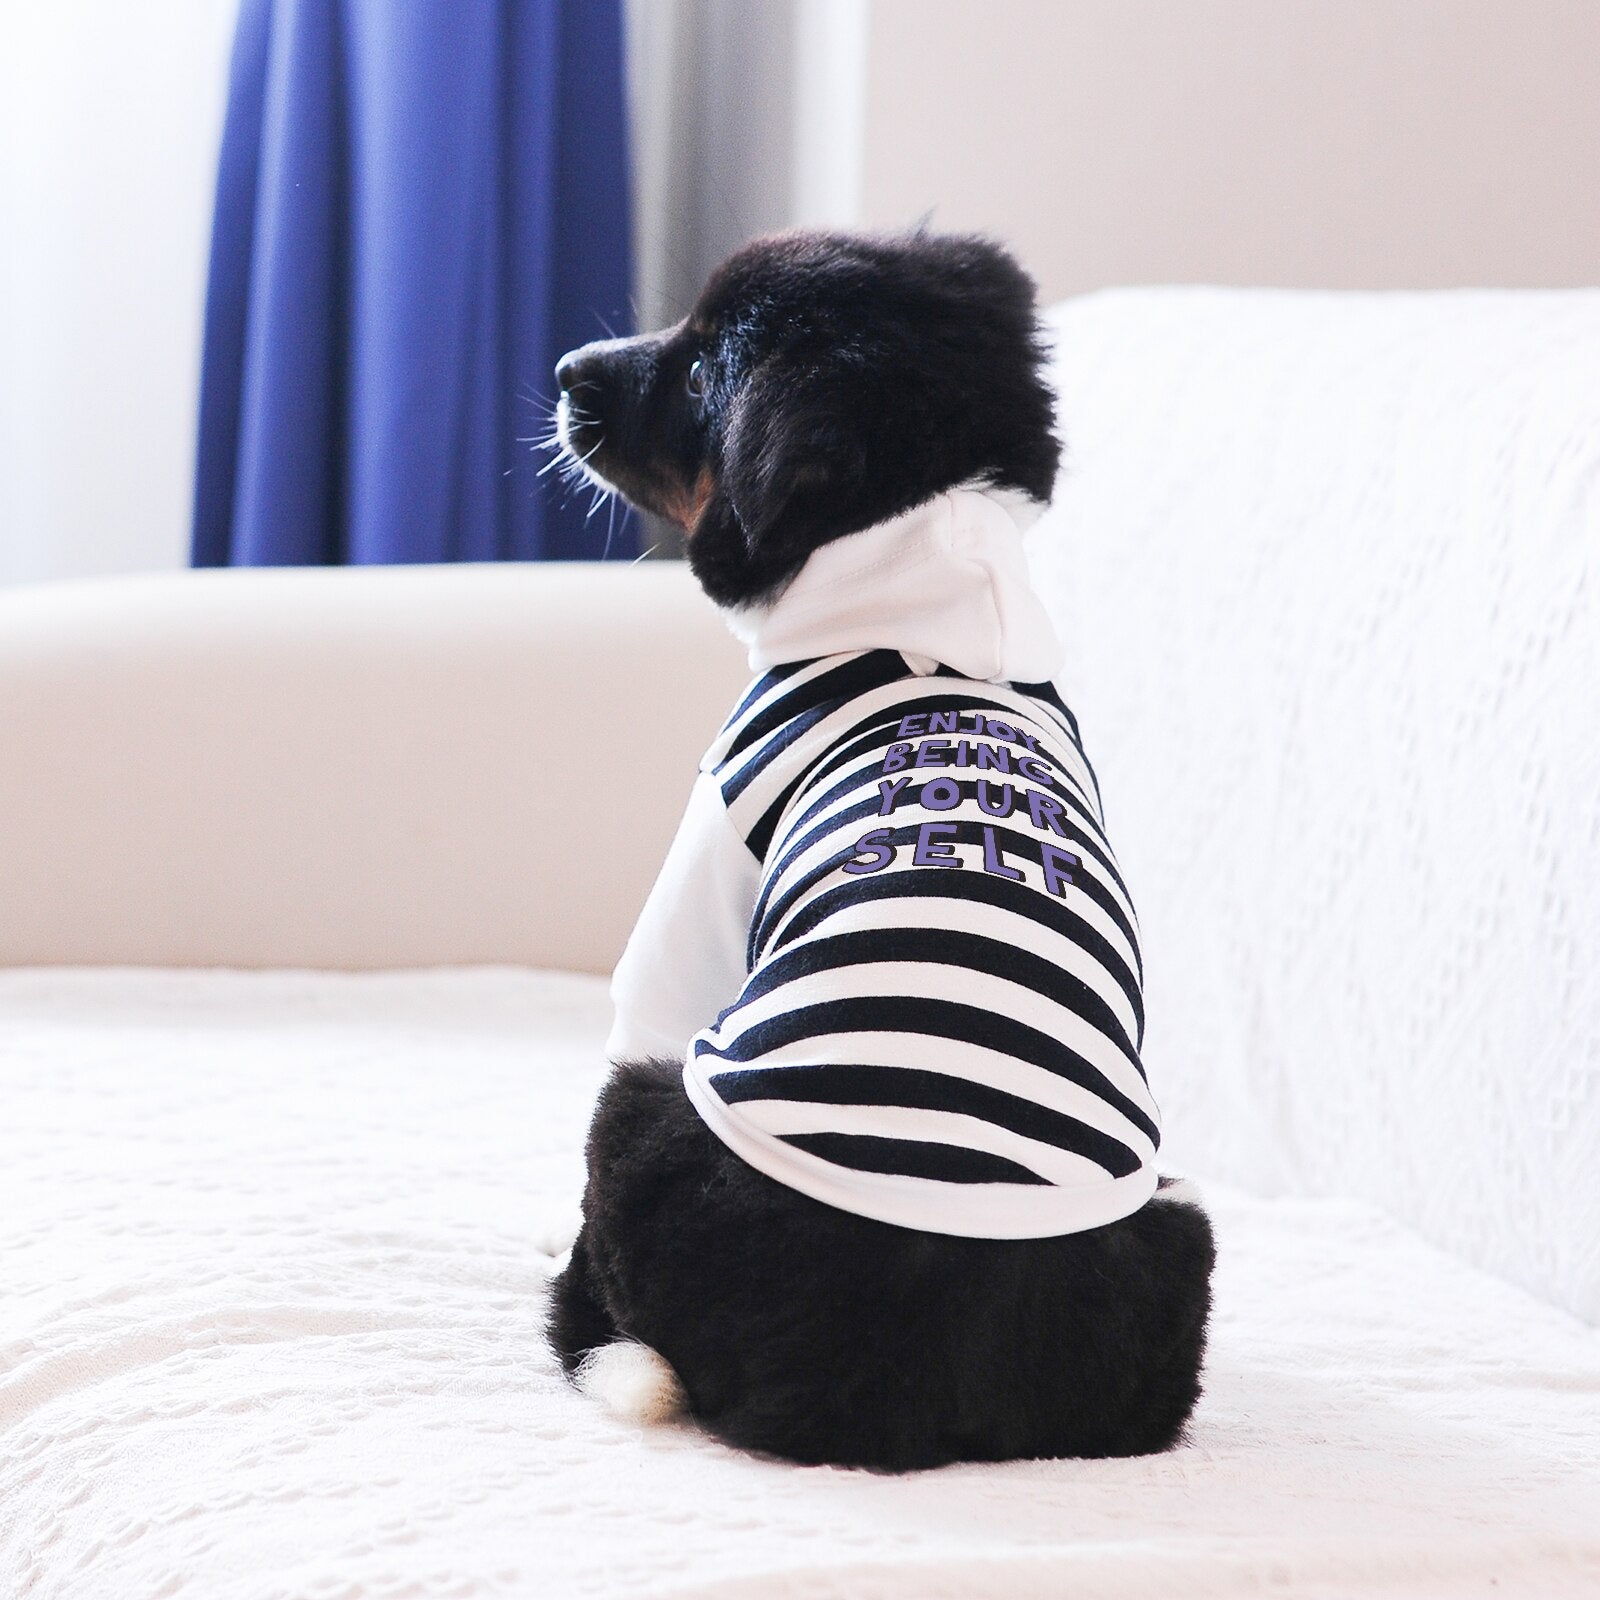 Dog Clothes Hoodie for Small Medium Large Pets and Cats, Cotton Soft Skin-Frindly Fabric Winter and Autumn to Keep Warm